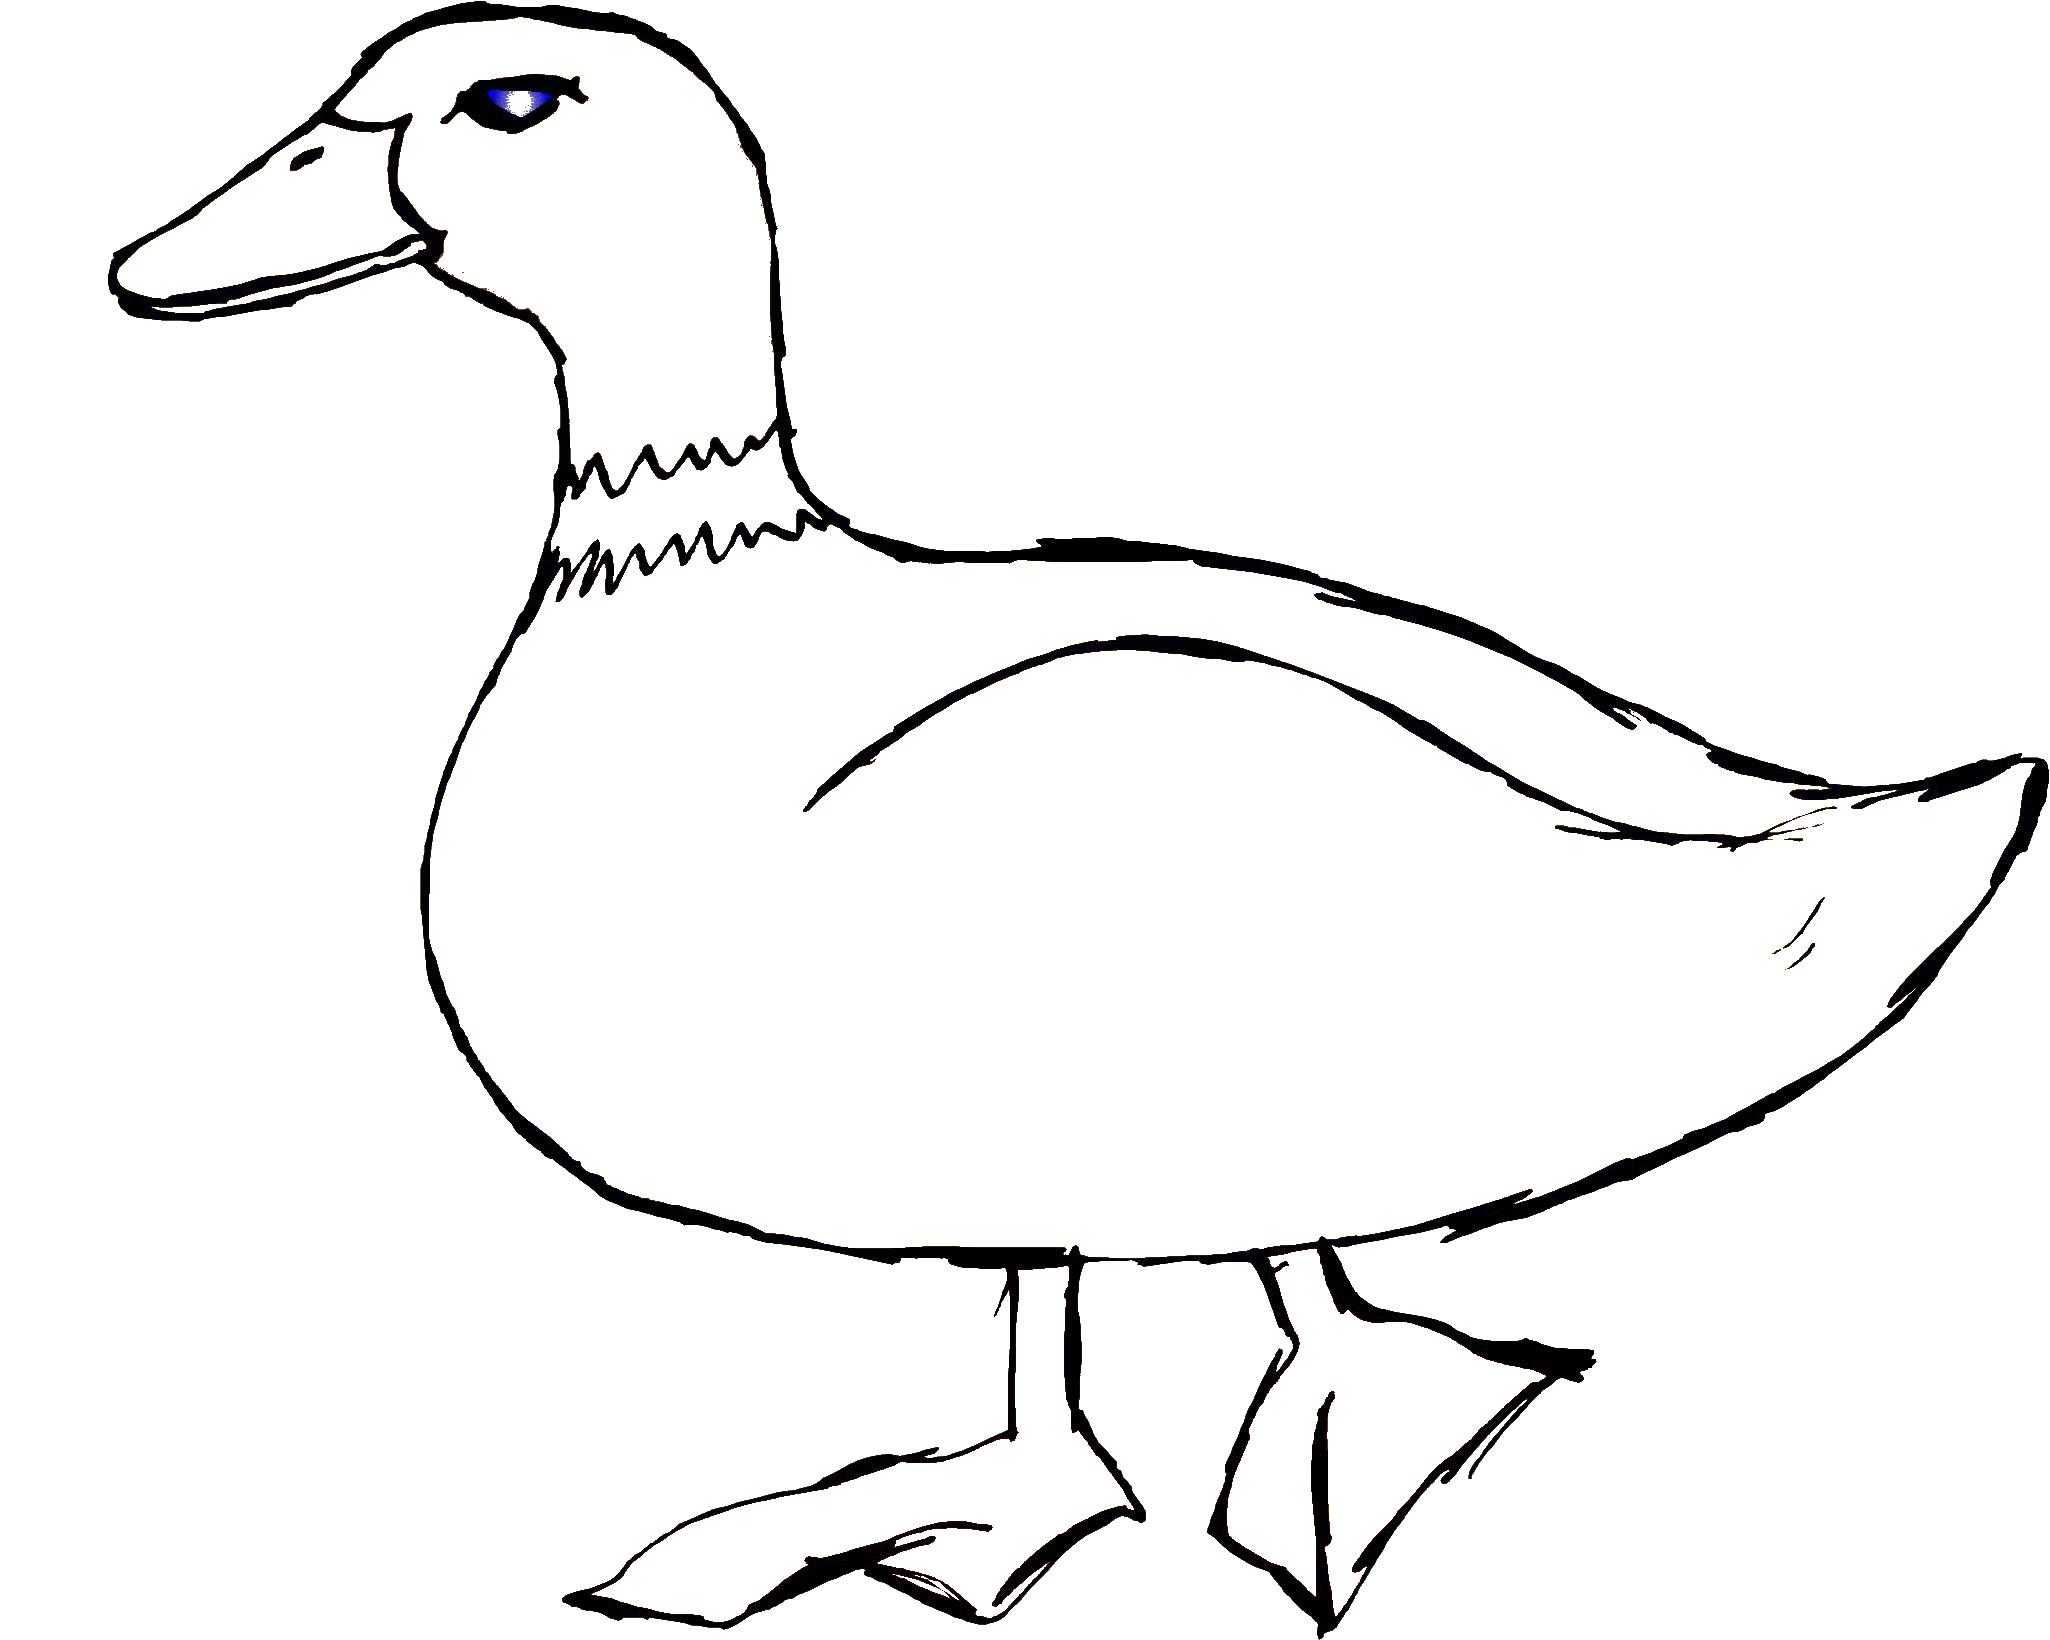 Coloring Duck on a walk. Category The contours for cutting out the birds. Tags:  duck.